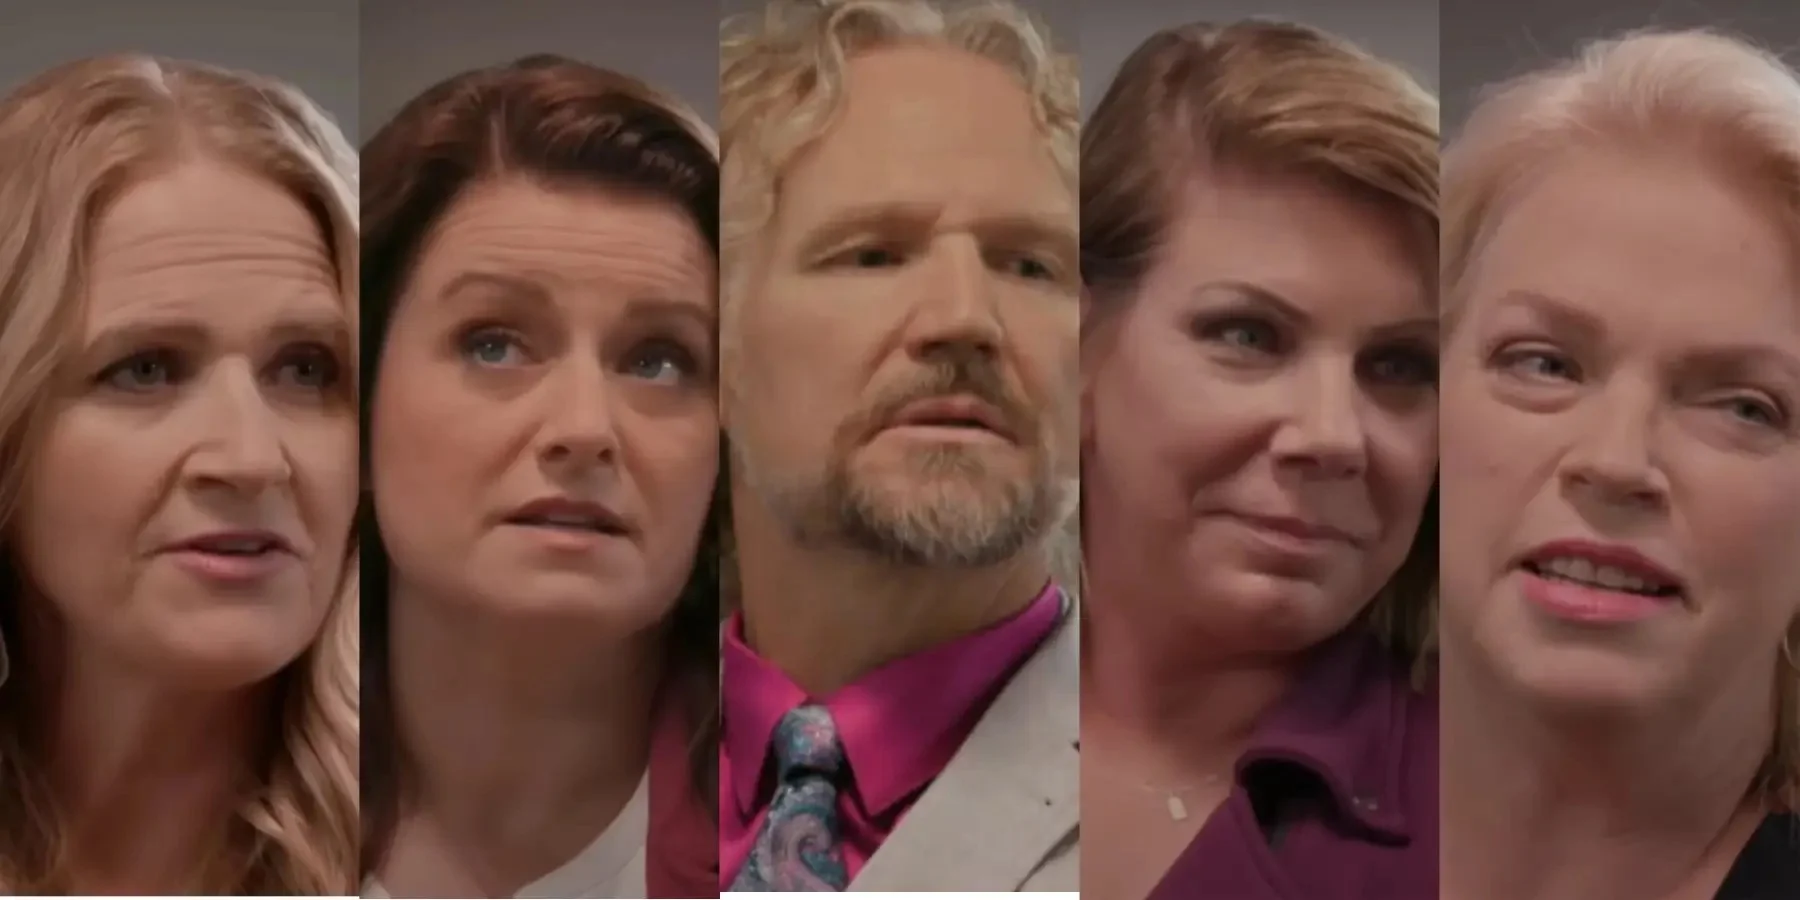 Christine, Robyn, Kody, Meri, and Janelle Brown from TLC's 'Sister Wives'